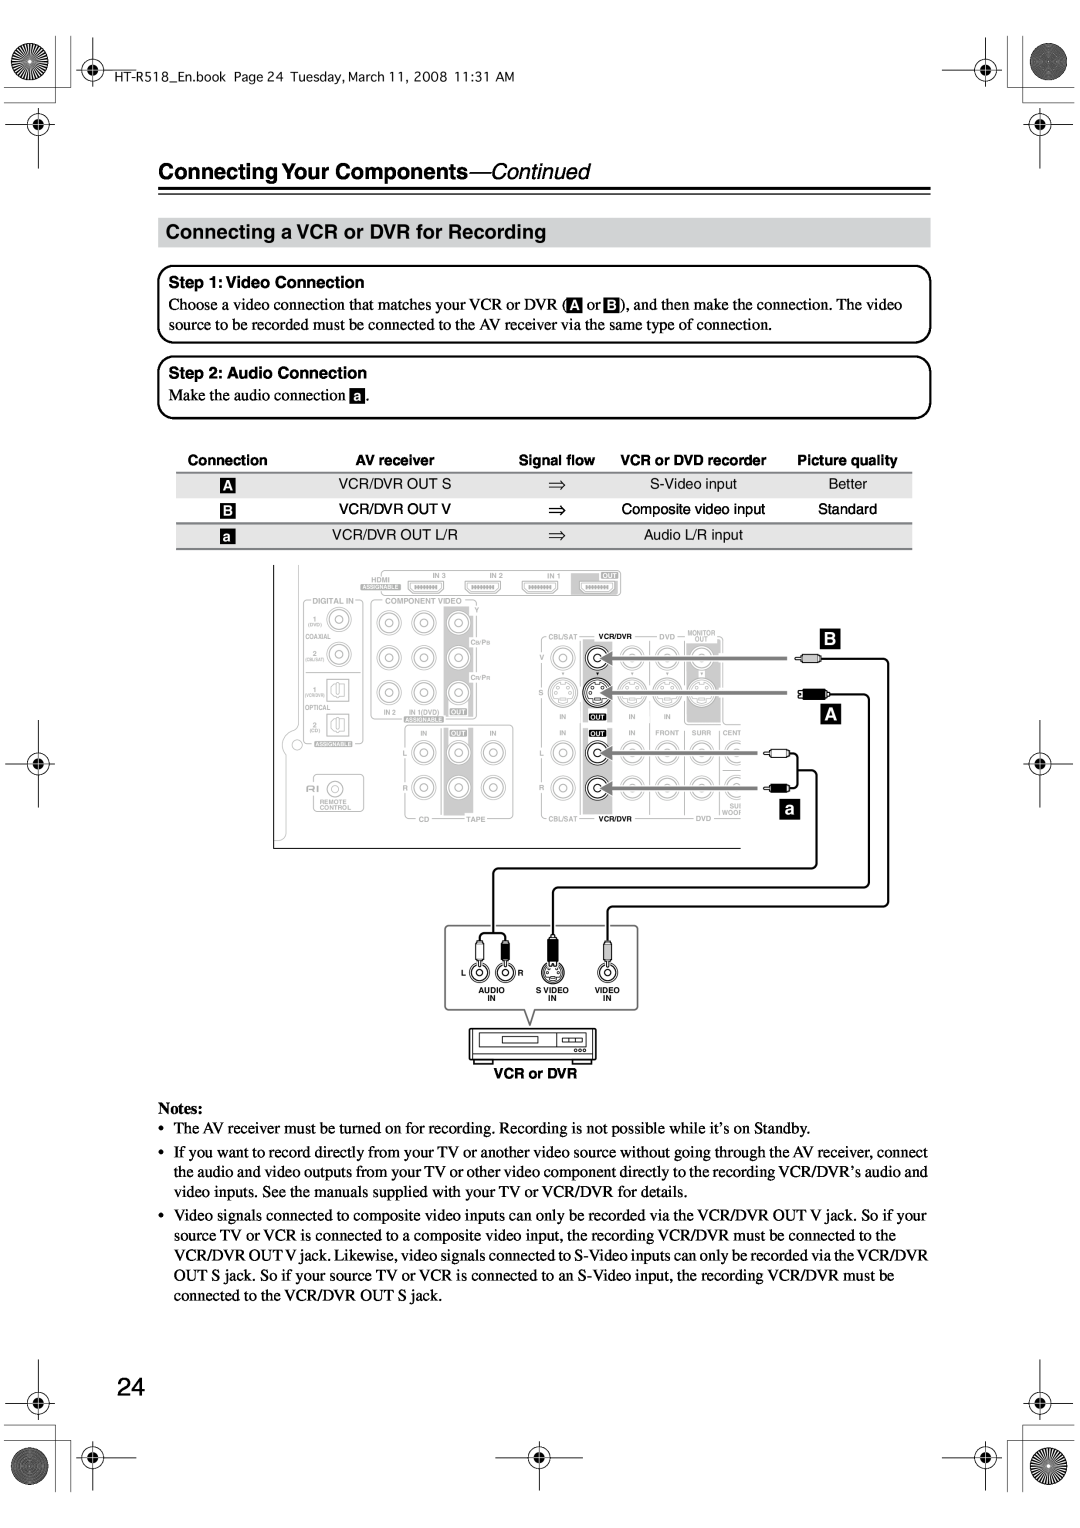 Onkyo HT-R518 instruction manual Connecting a VCR or DVR for Recording, Connecting Your Components-Continued 